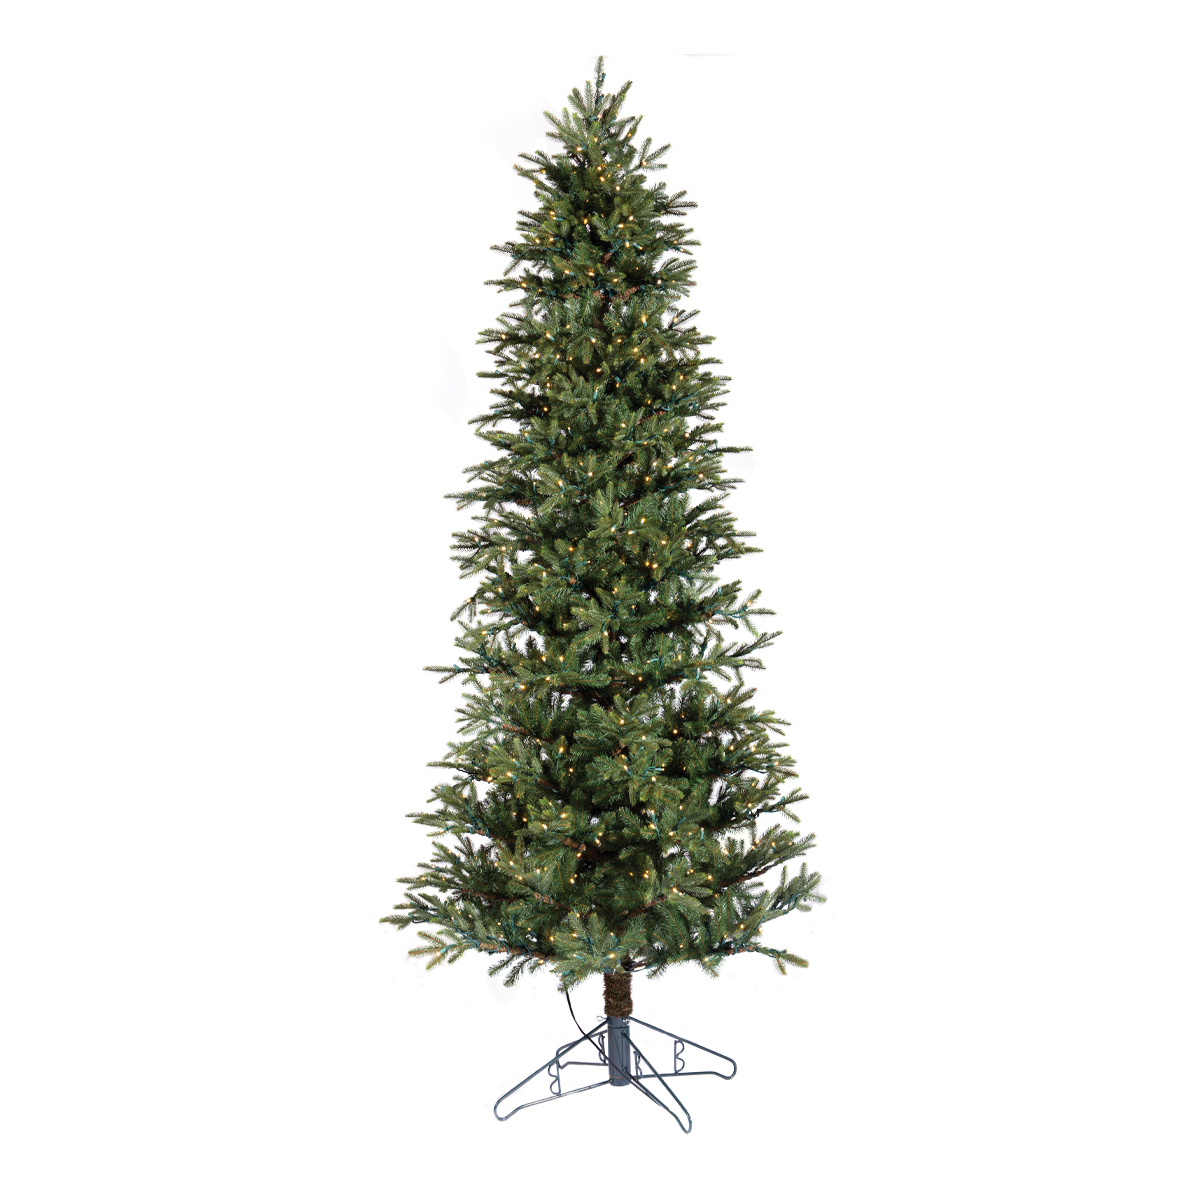 Alaskan Deluxe Christmas Tree - Pencil Slim Style - Warm White LEDs - One-Plug Power Pole - 9ft Tall